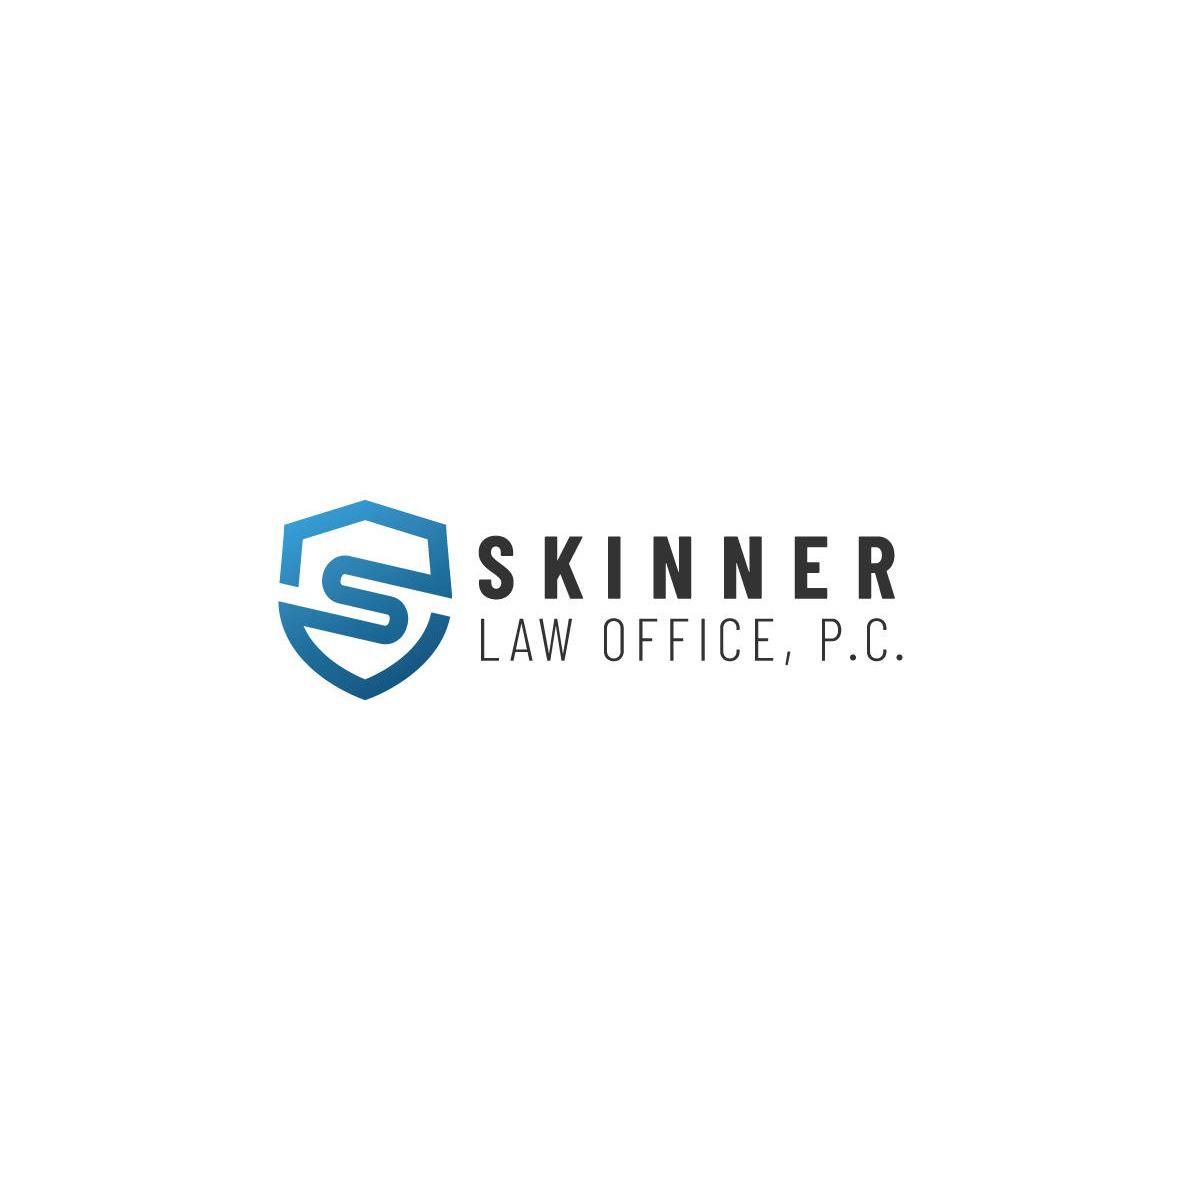 Skinner Law Office, P.C. - Rapid City, SD 57701 - (605)519-5600 | ShowMeLocal.com